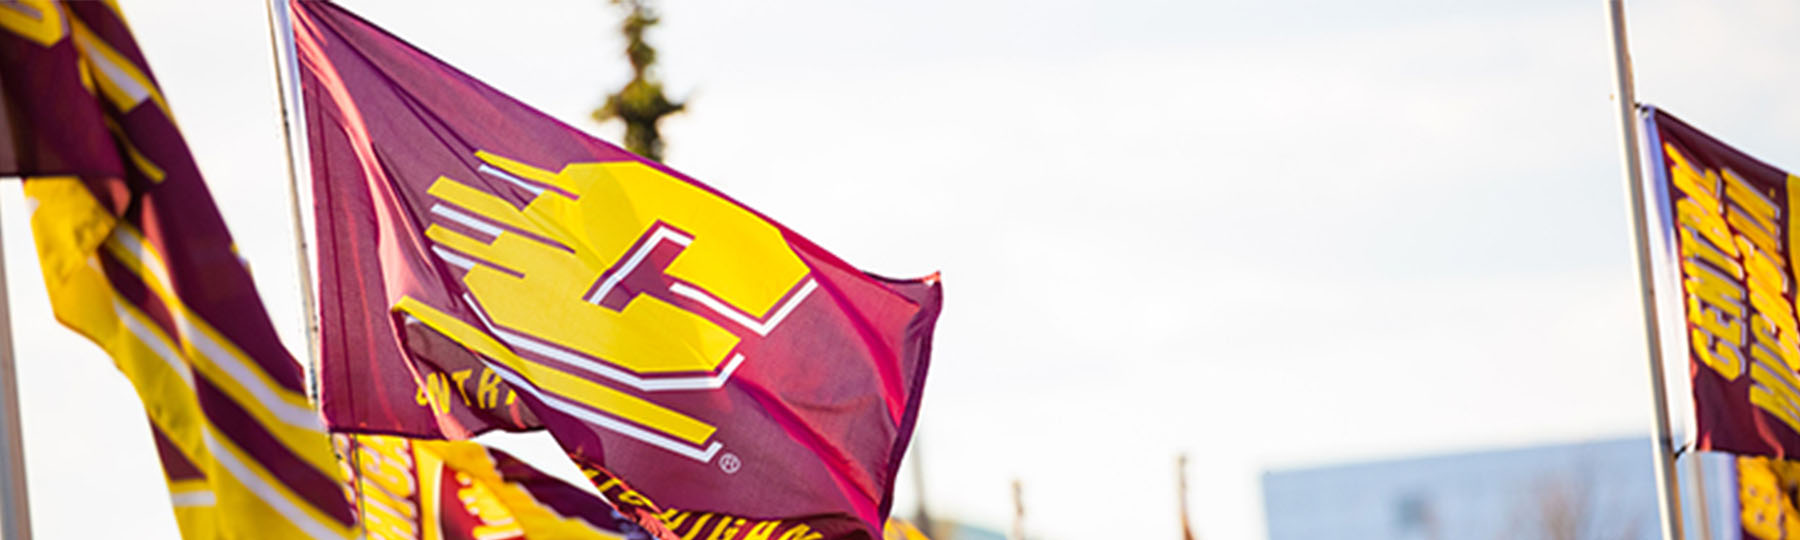 A Central Michigan University flag with a gold action C on a maroon background.